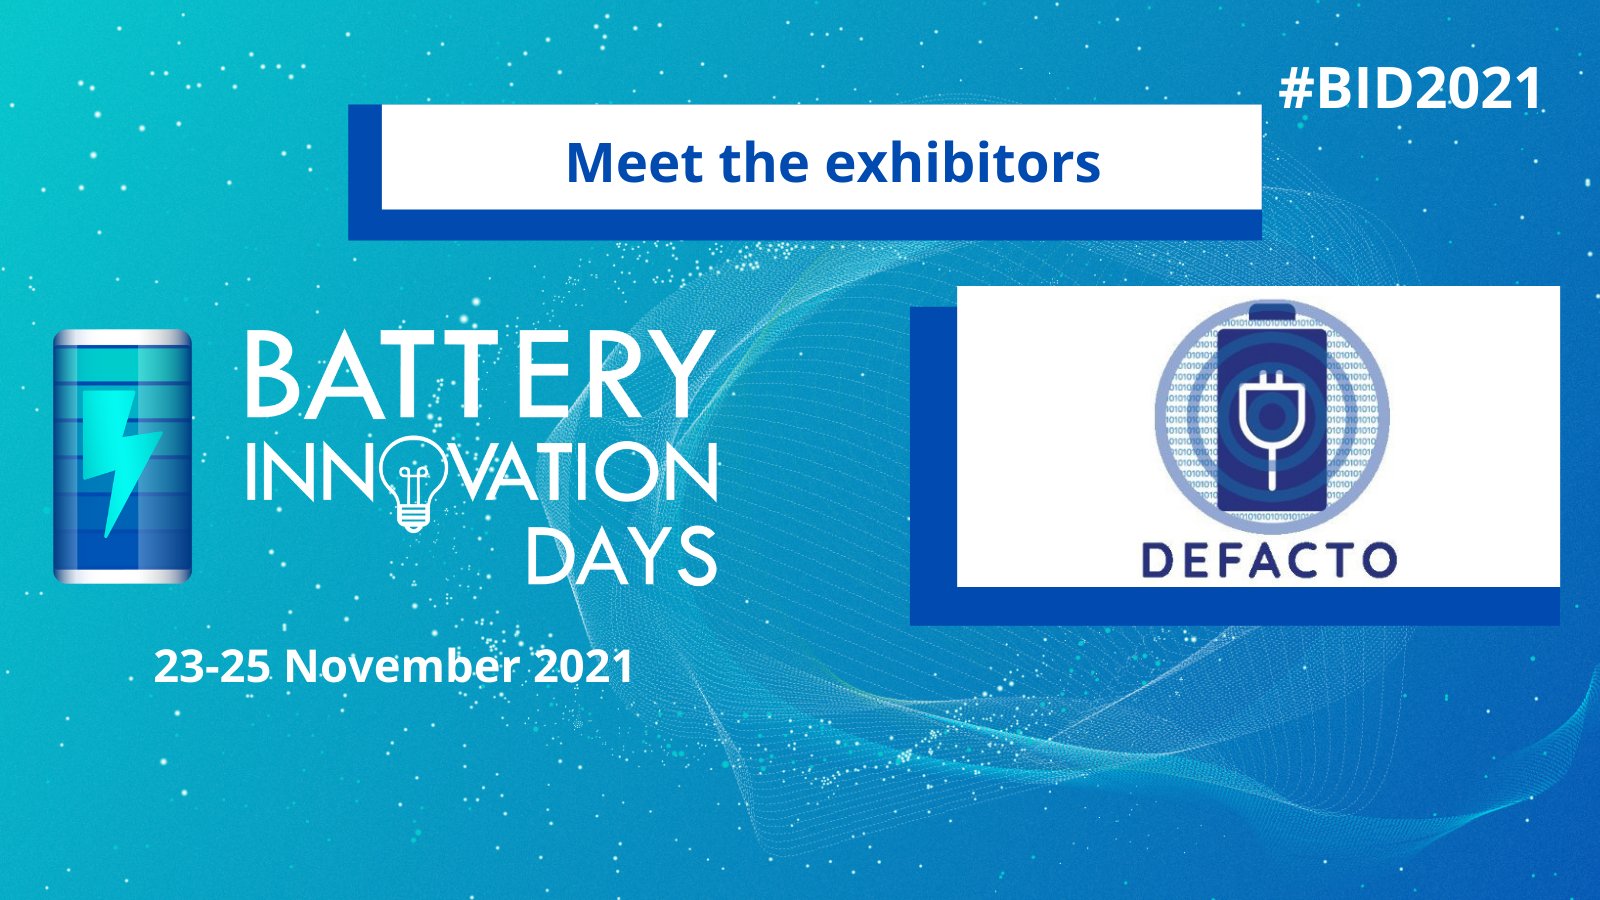 DEFACTO AT THE BATTERY INNOVATION DAYS